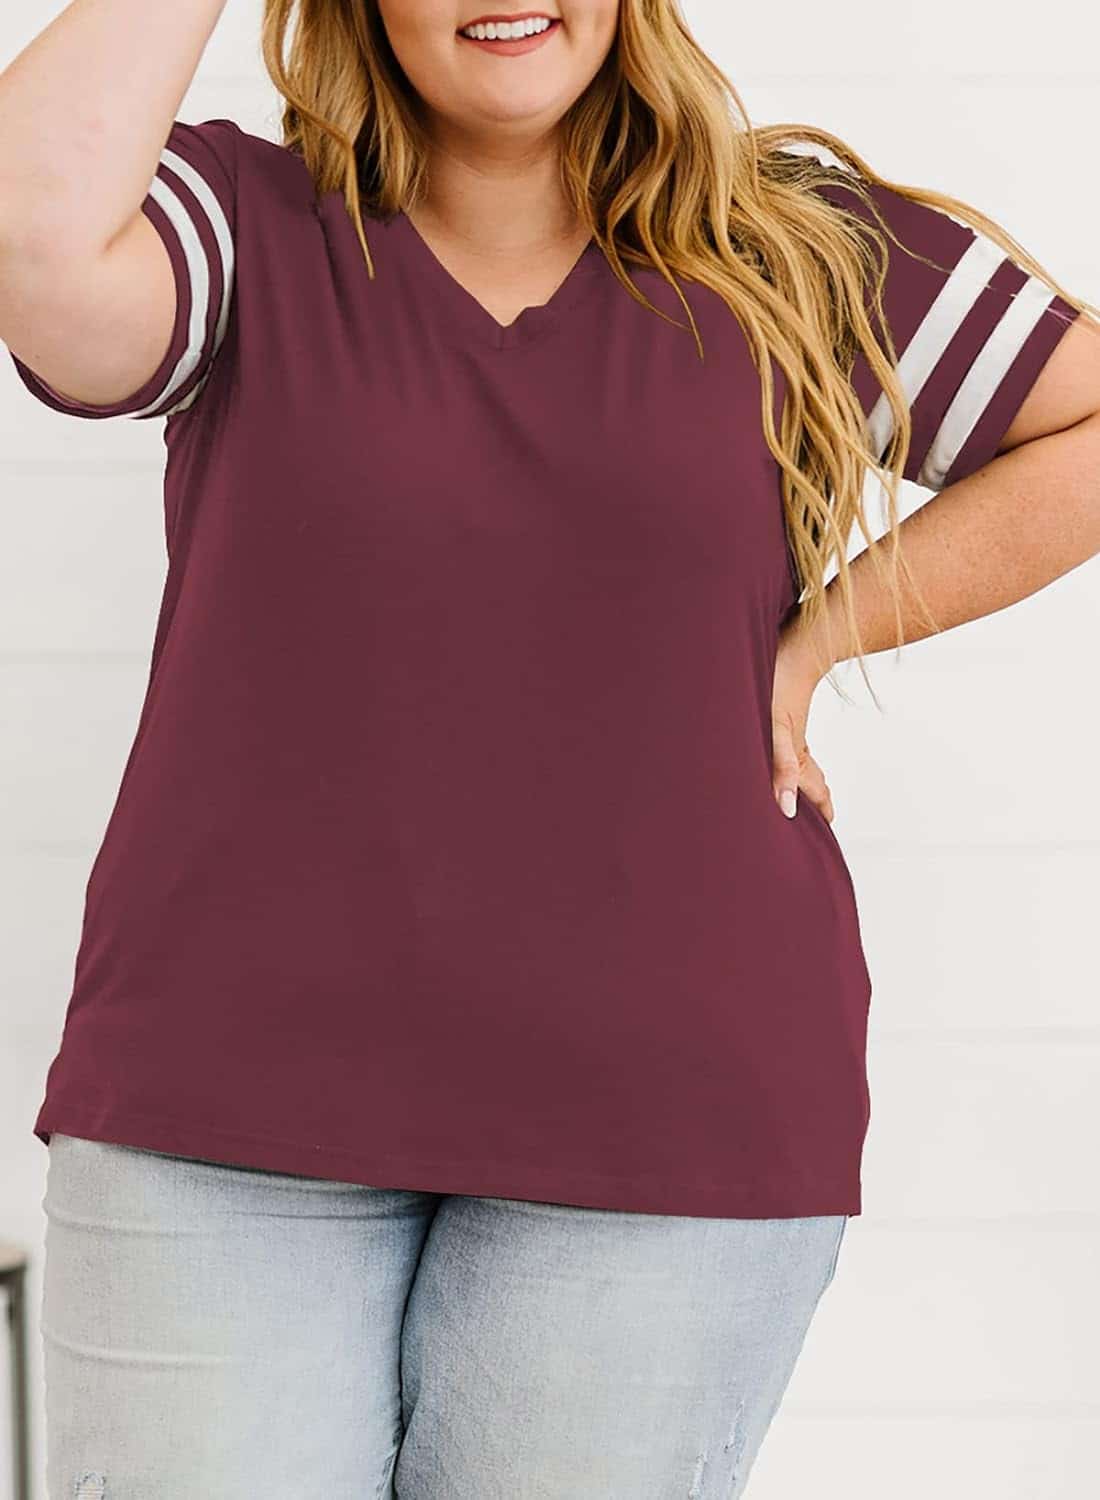 MyFav Women's T-Shirts Plus Size Short Sleeve Crew Neck Striped Tee: A Review